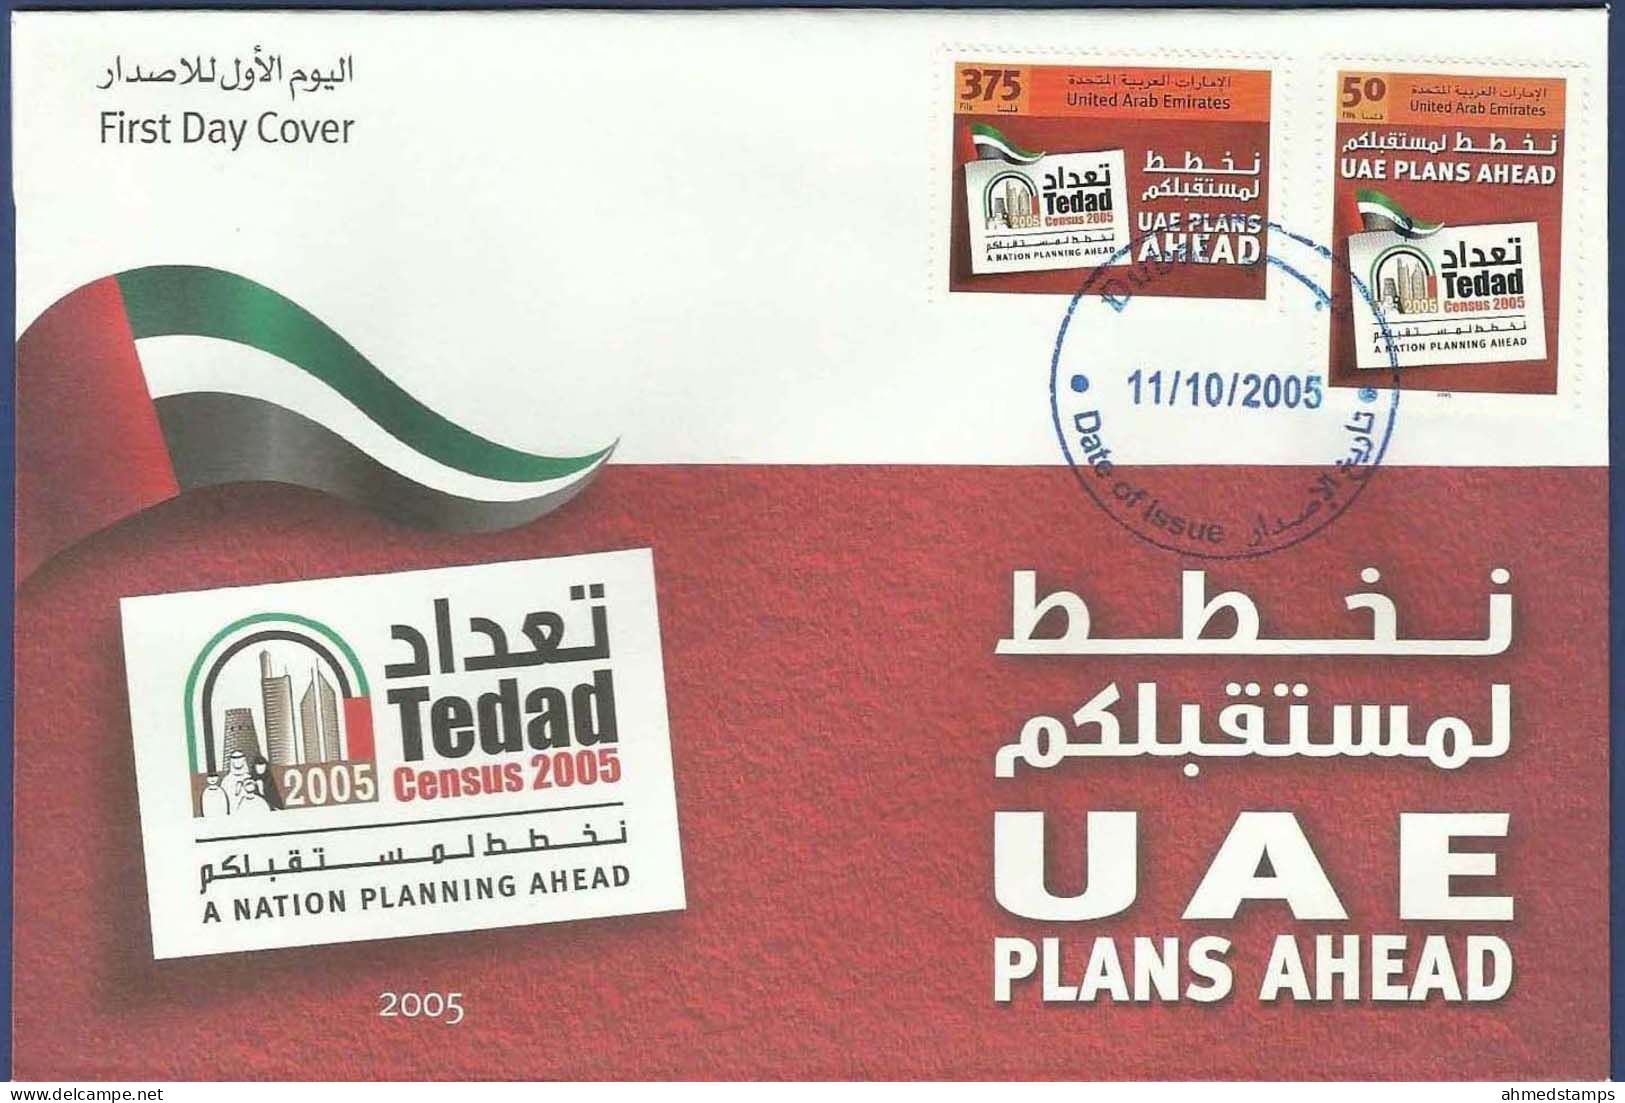 UNITED ARAB EMIRATES UAE MNH 2005 FDC FIRST DAY COVER CENSUS PLANS AHEAD A NATION PLANNING - Emirats Arabes Unis (Général)